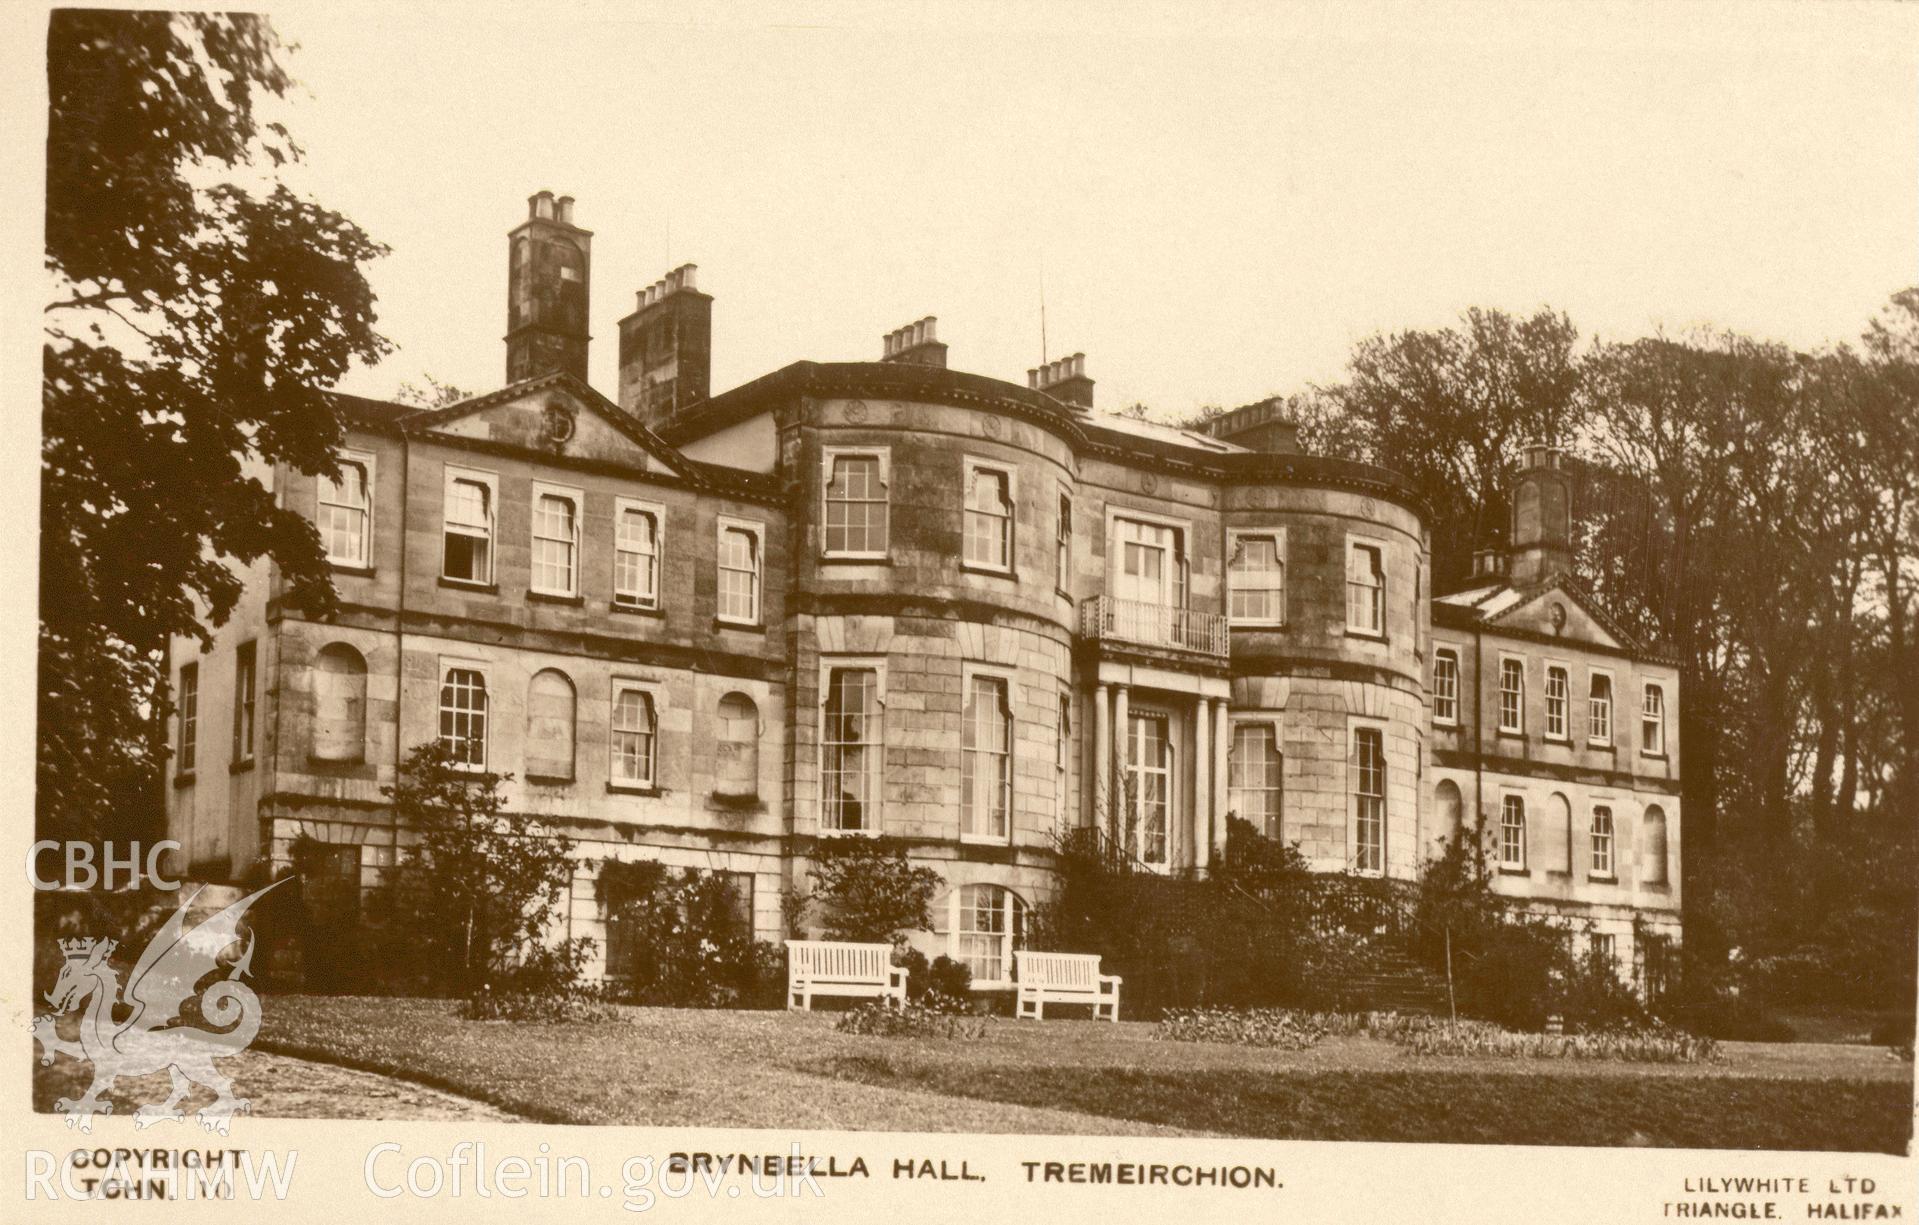 Digitised postcard image of west front, Brynbella, Lilywhite Ltd. Produced by Parks and Gardens Data Services, from an original item in the Peter Davis Collection at Parks and Gardens UK. We hold only web-resolution images of this collection, suitable for viewing on screen and for research purposes only. We do not hold the original images, or publication quality scans.